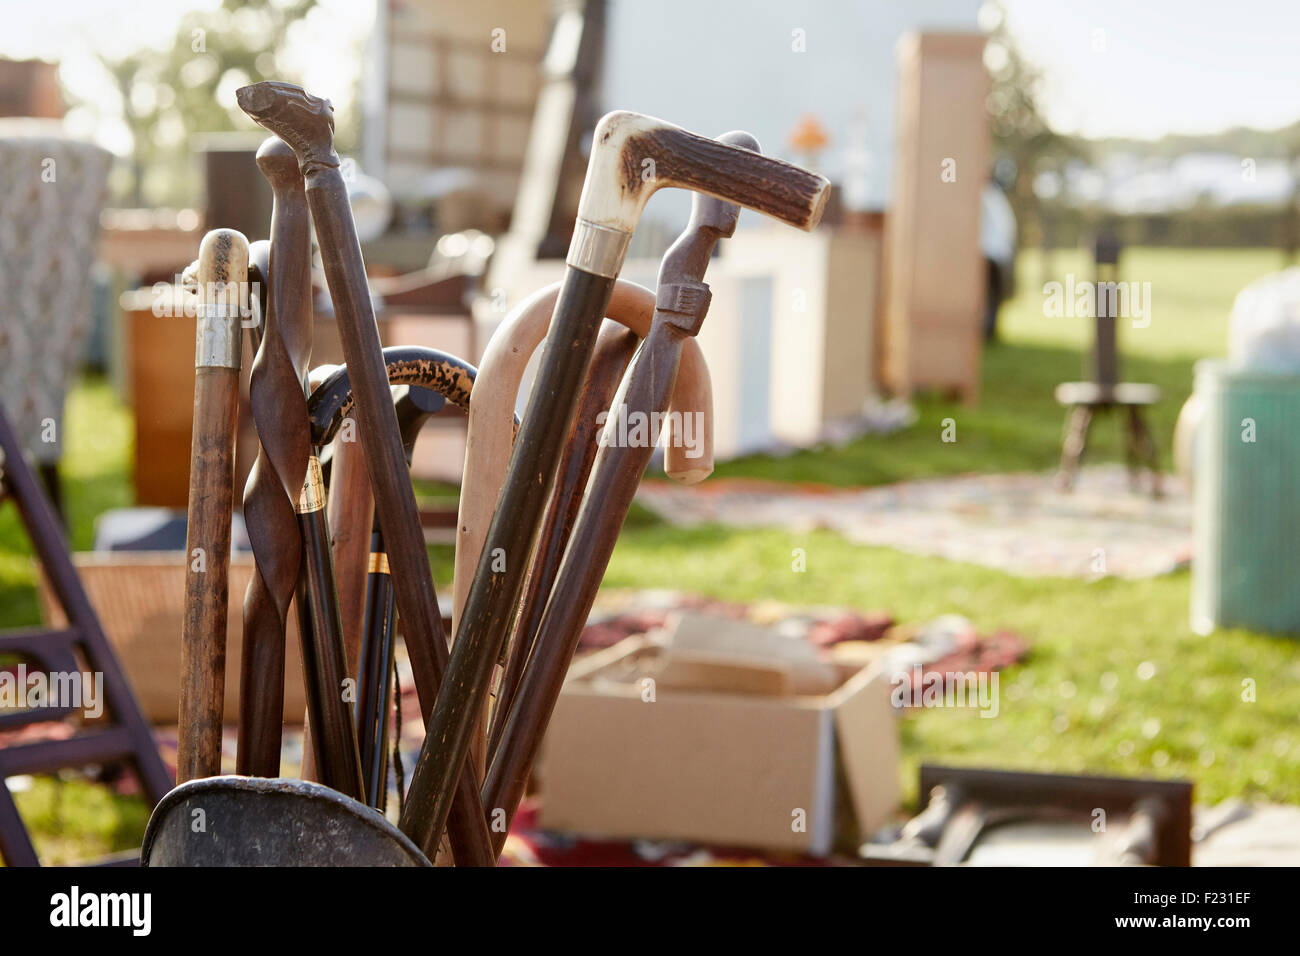 Selection of wooden canes and walking sticks for sale at an open air flea market stall. Stock Photo